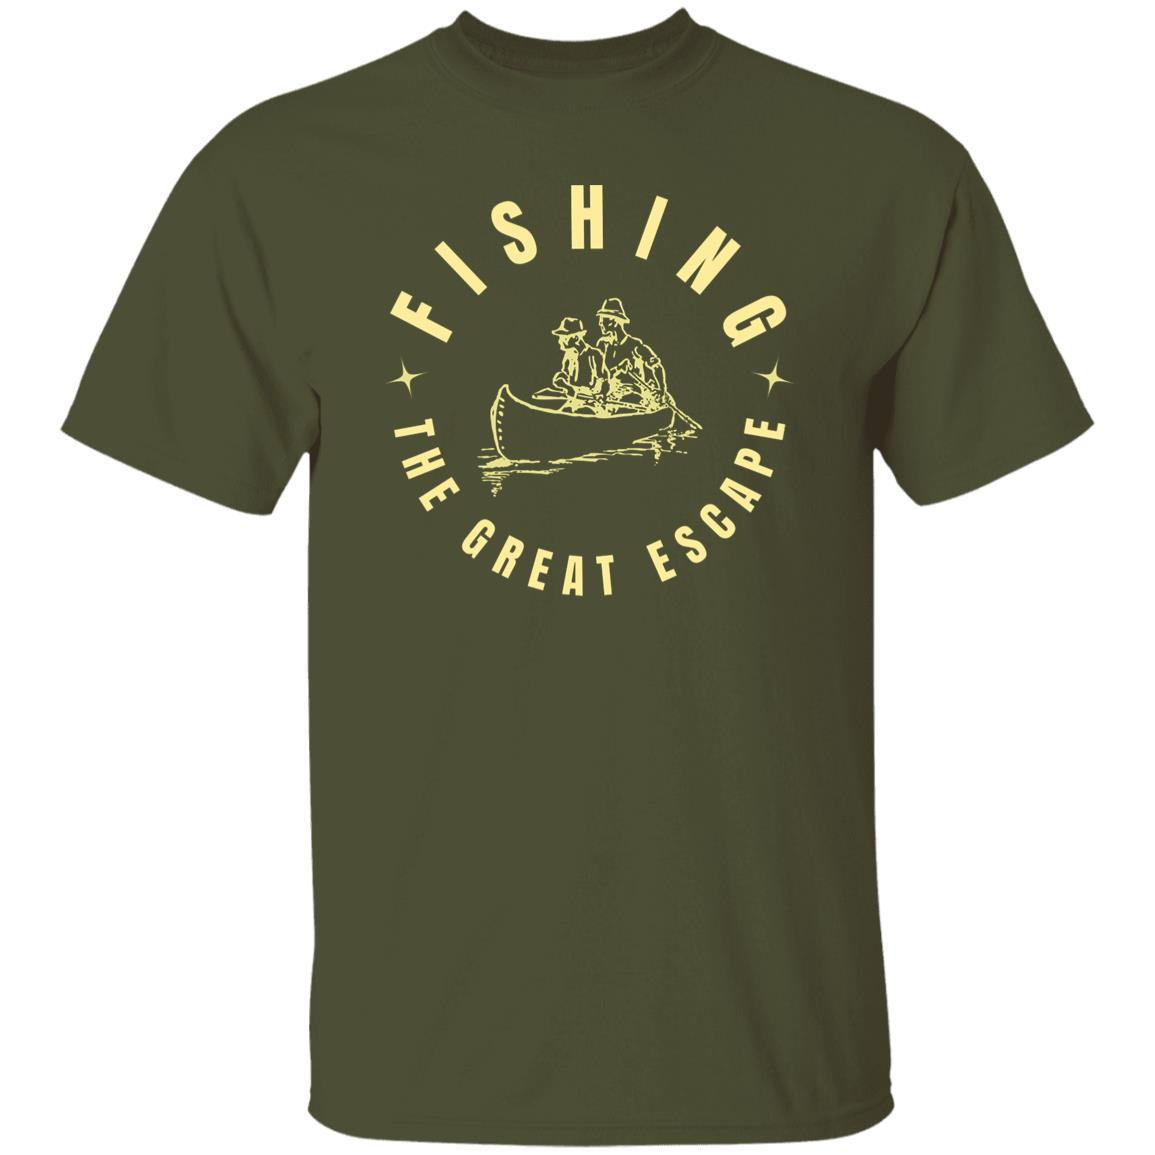 Fishing the great escape t-shirt k military-green